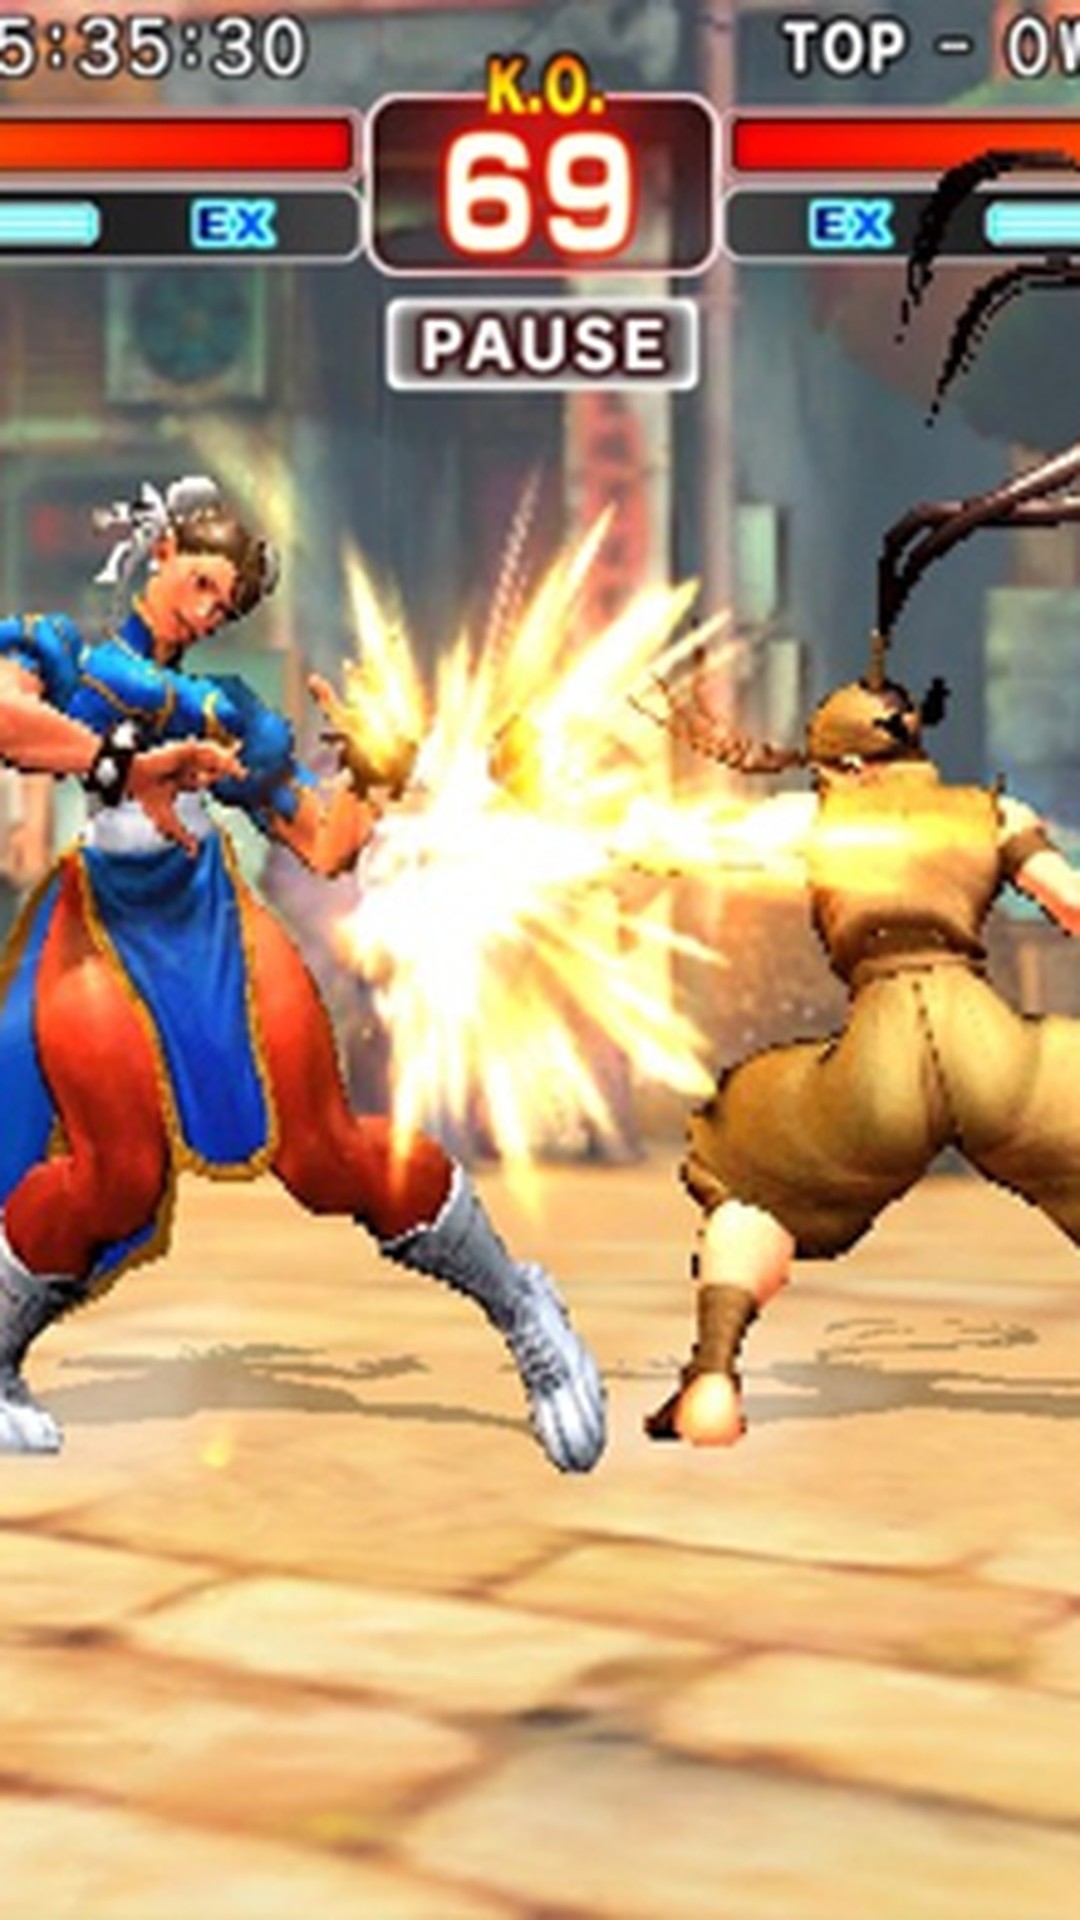 Street Fighter IV: Champion Edition' Now Available on Android